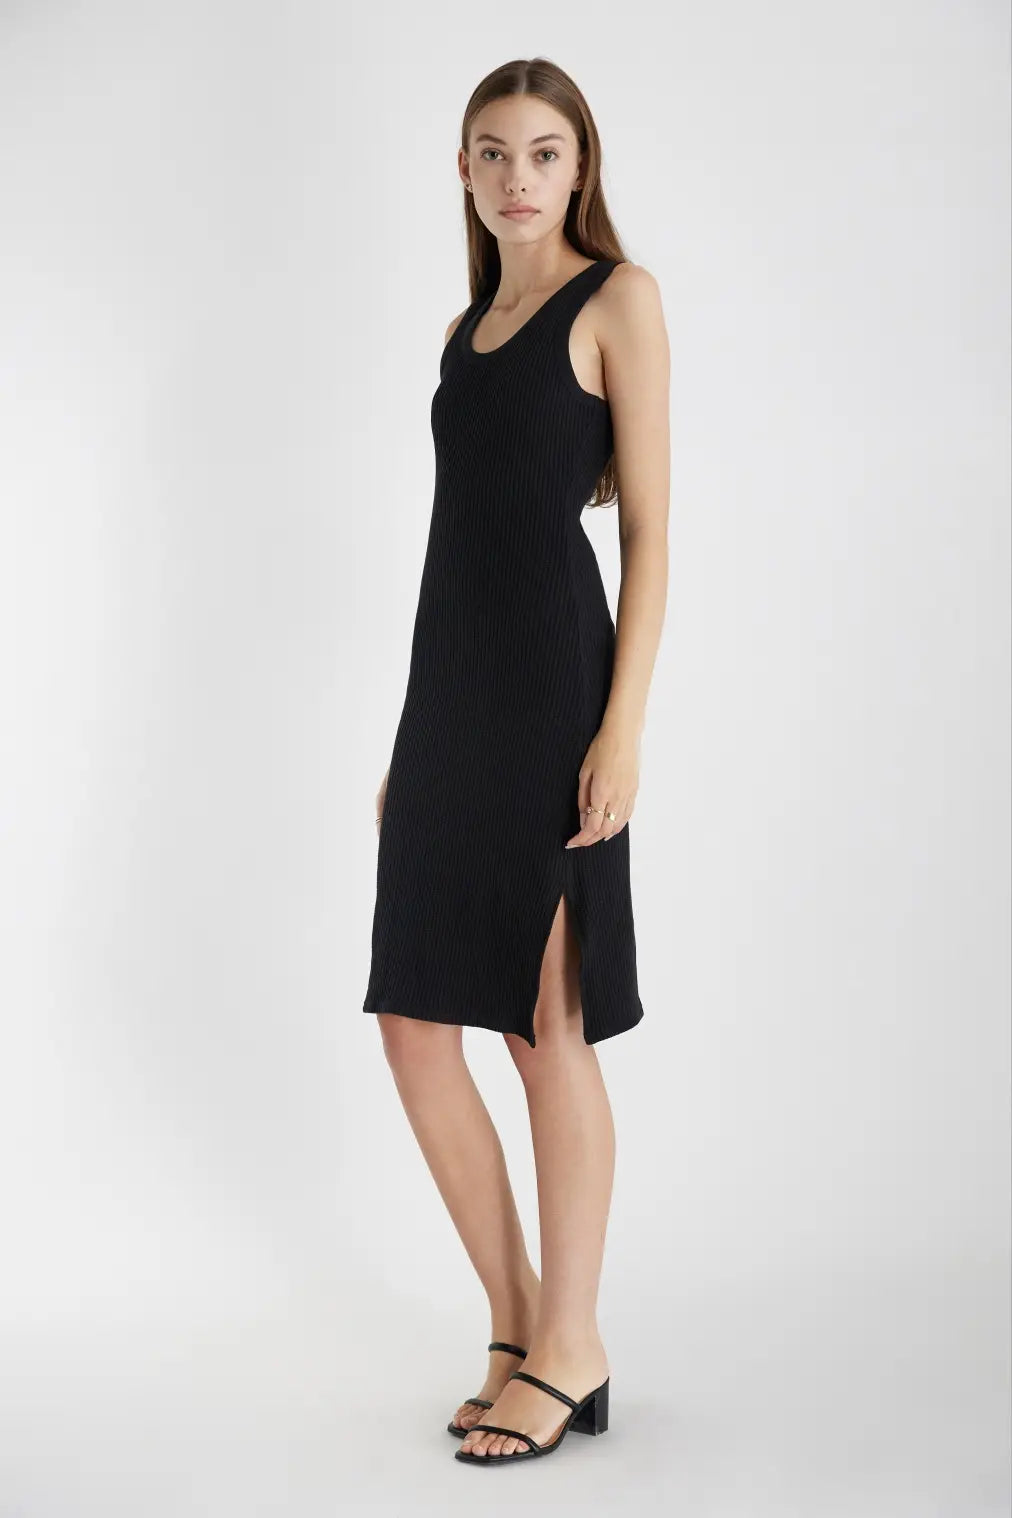 For lounging or dressing up, The Jessy Dress is a versatile tank dress crafted in a thermal waffle knit fabric - durable and soft with added warmth. A classic addition to your wardrobe. We would style this with an oversized trench and some loafers for a brunch date or coffee. 